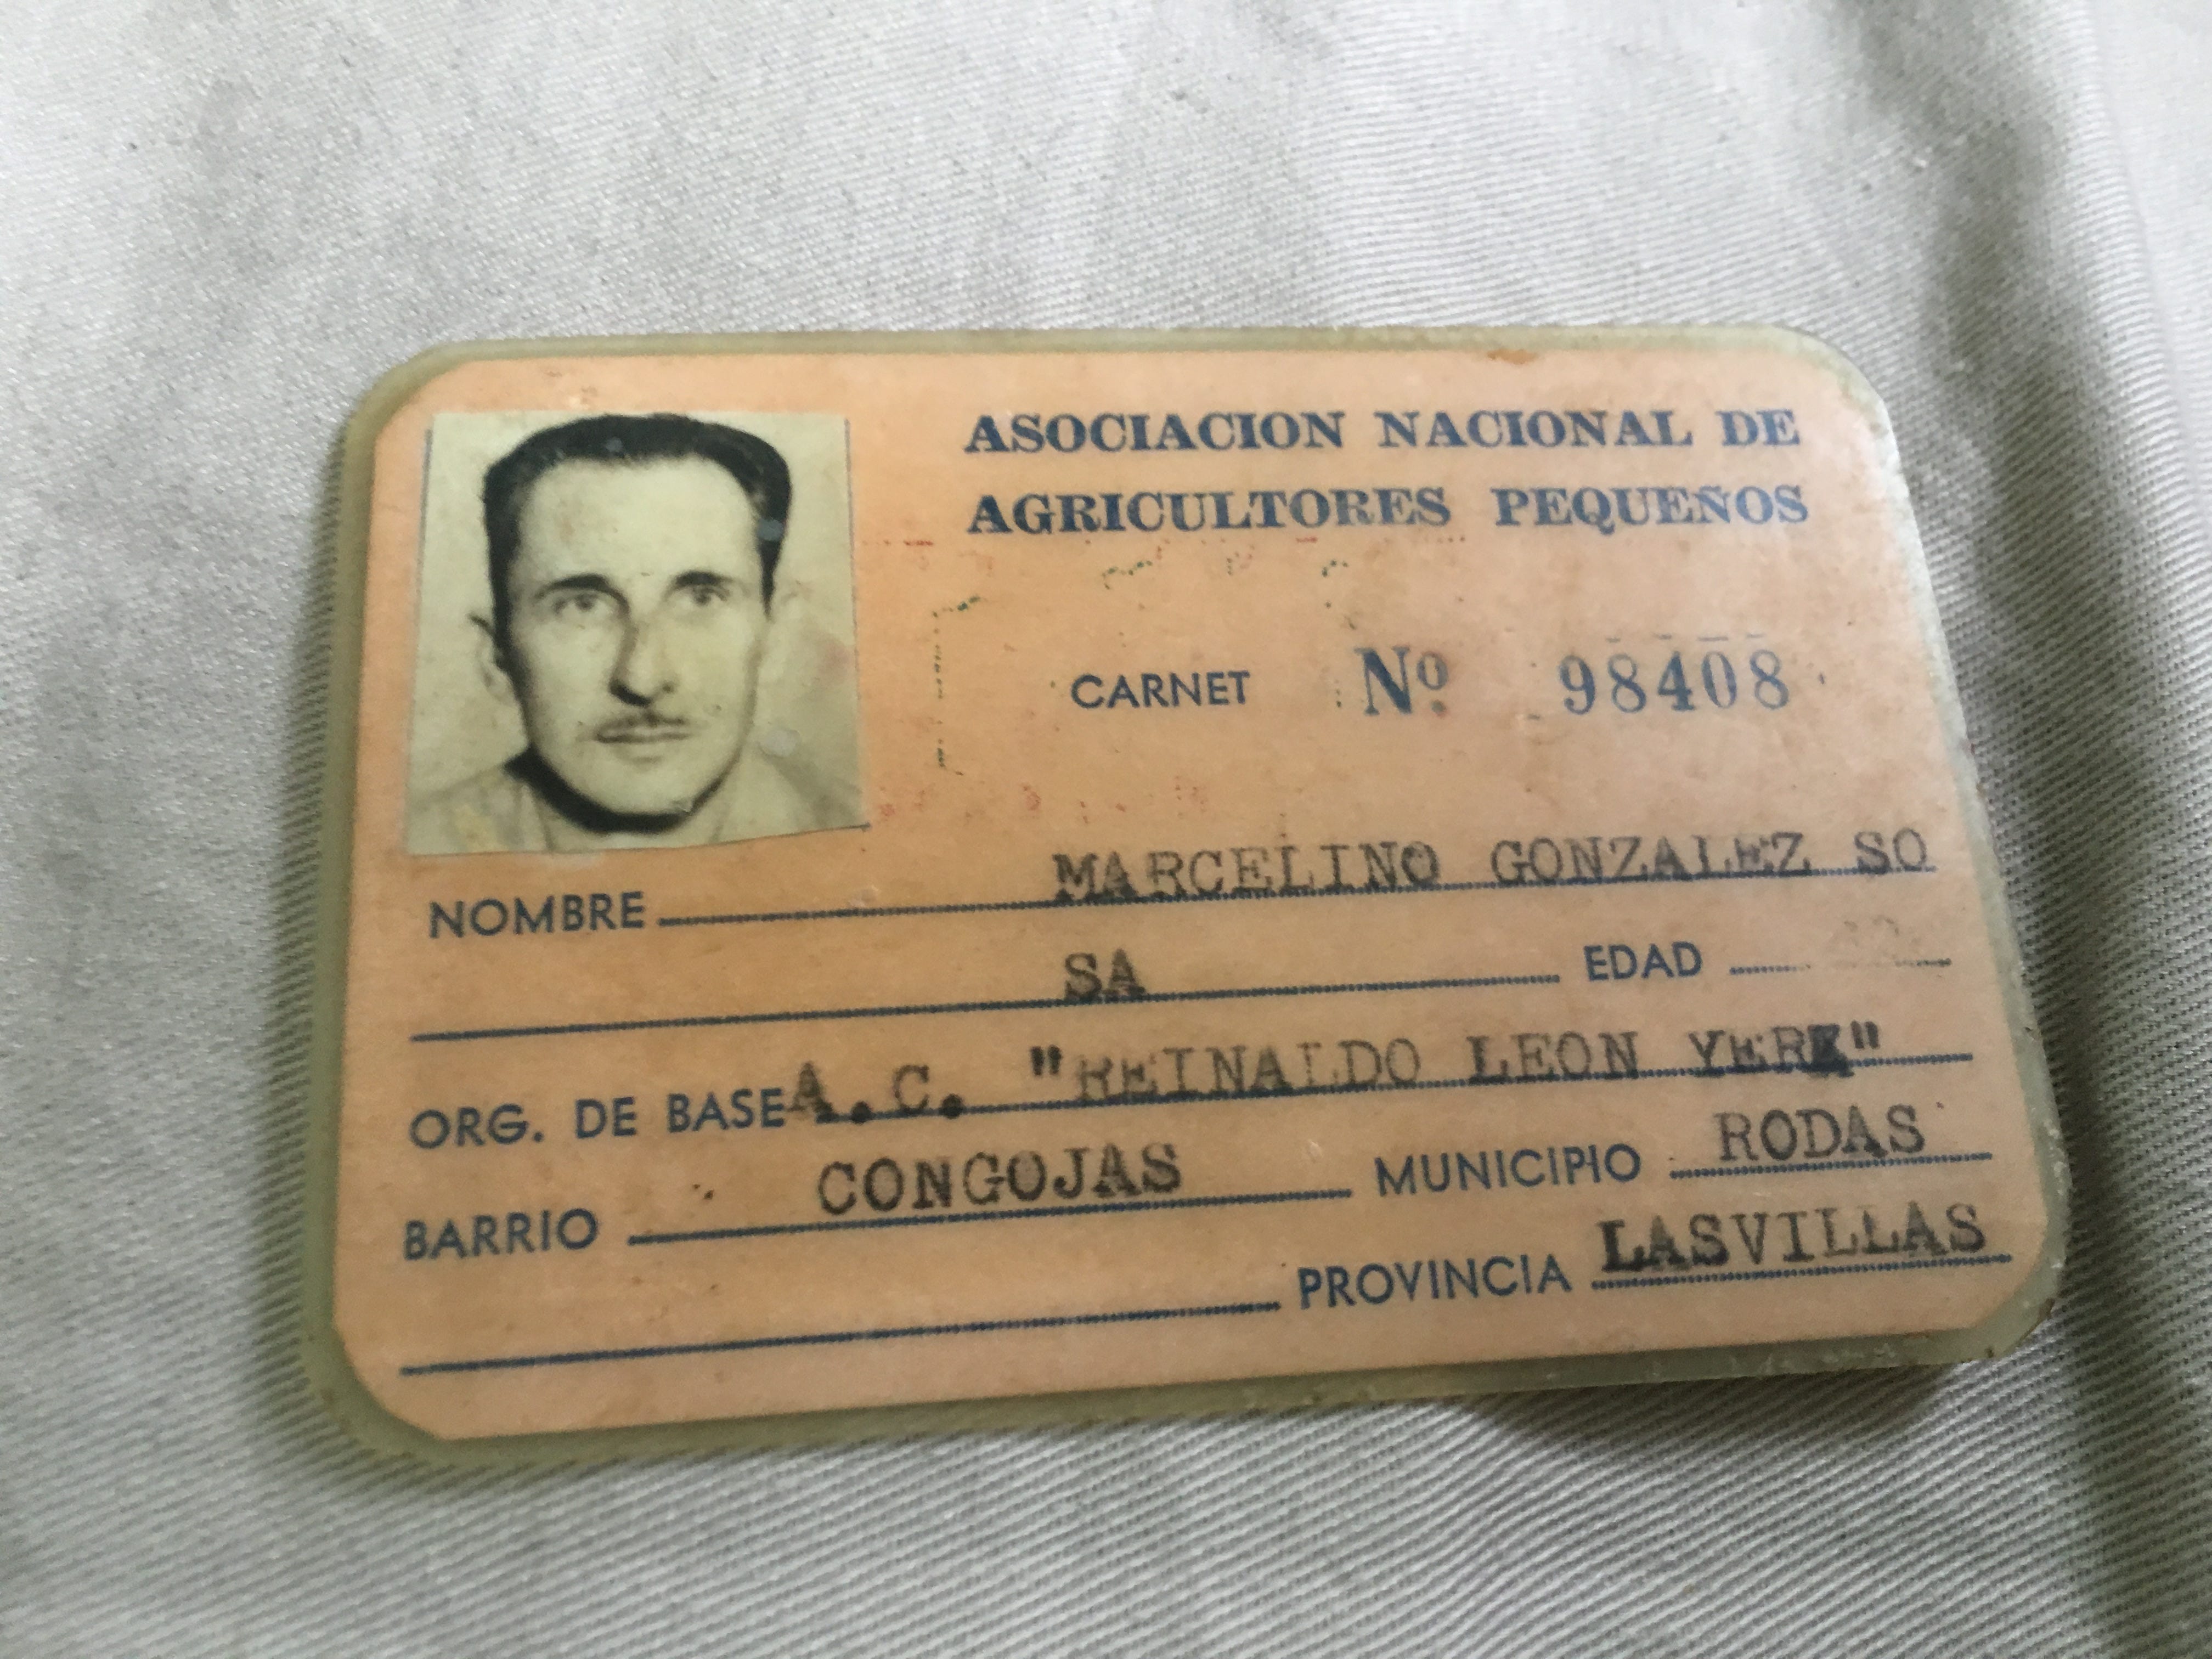 My great grandfather's identification card